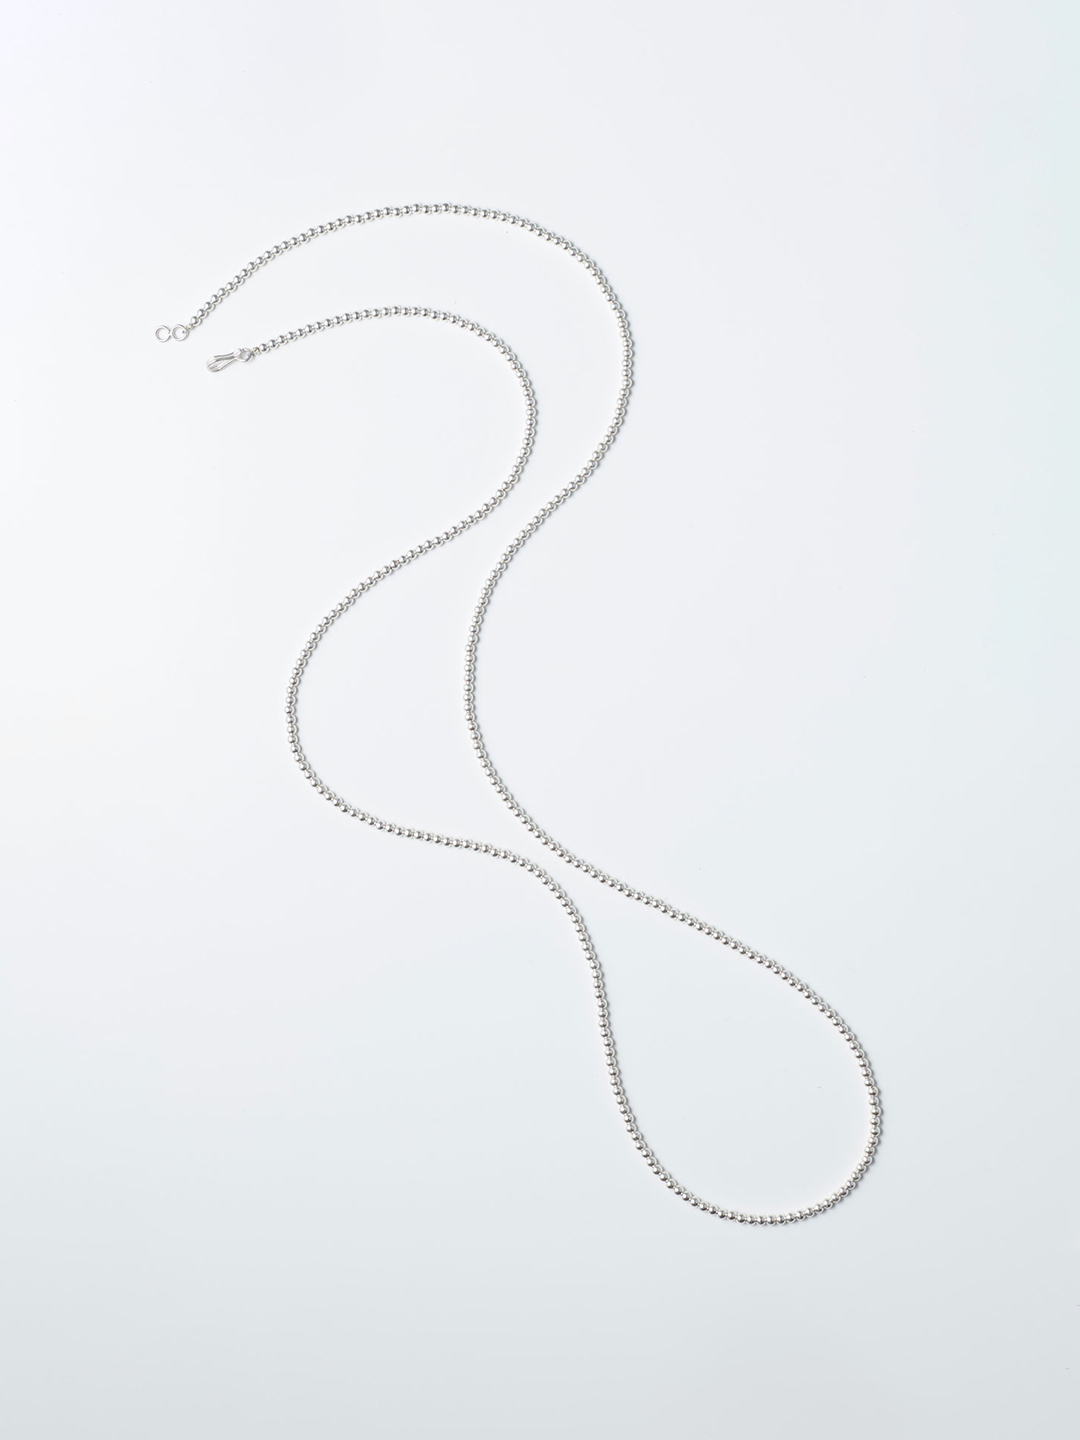 3mm Ball Chain Necklace 91cm  - Silver